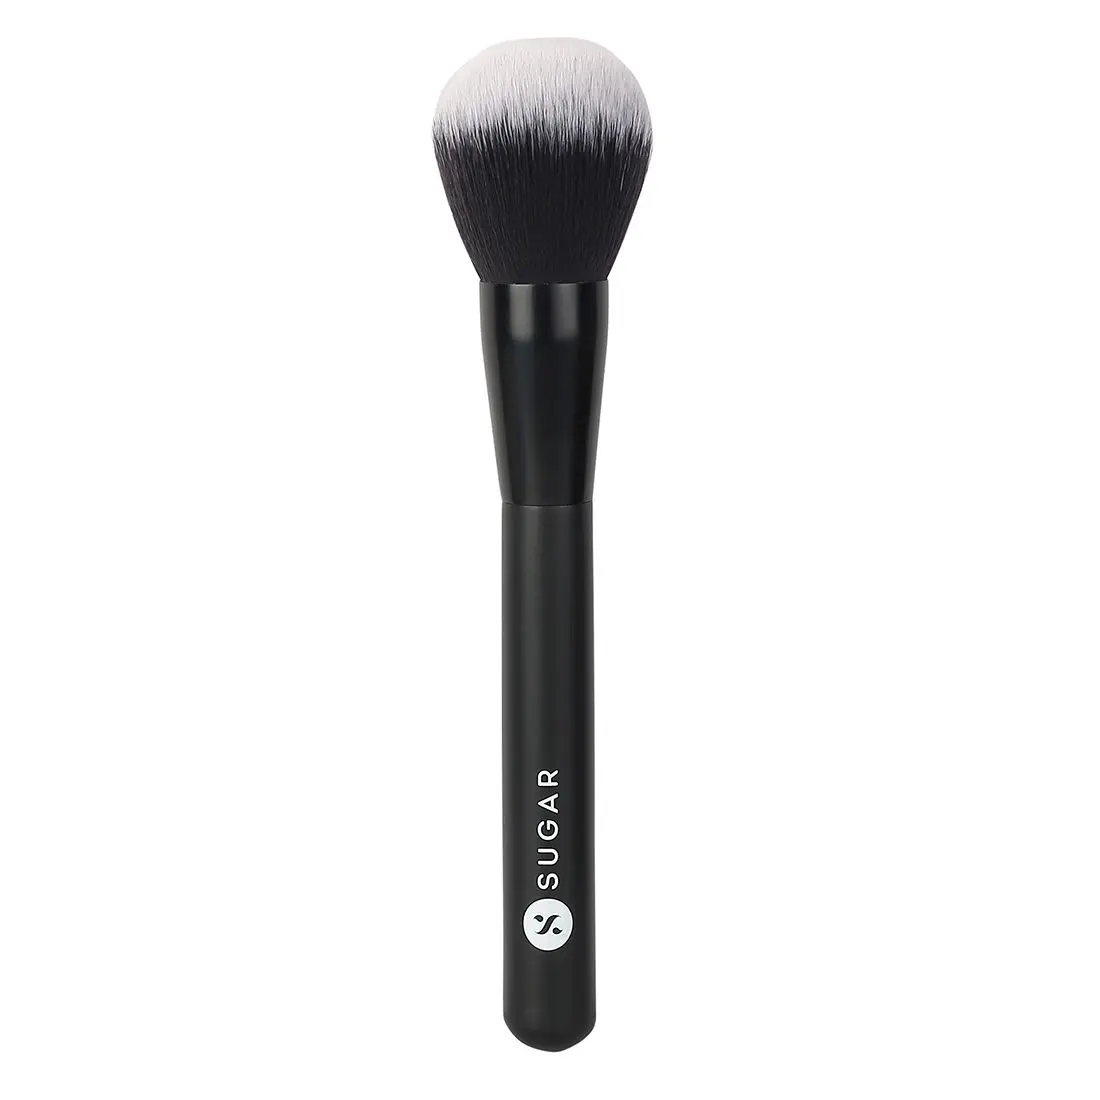 SUGAR Cosmetics - Blend Trend - 007 Powder Brush (Brush For Easy Application of Powder) - Soft, Synthetic Bristles and Wooden Handle